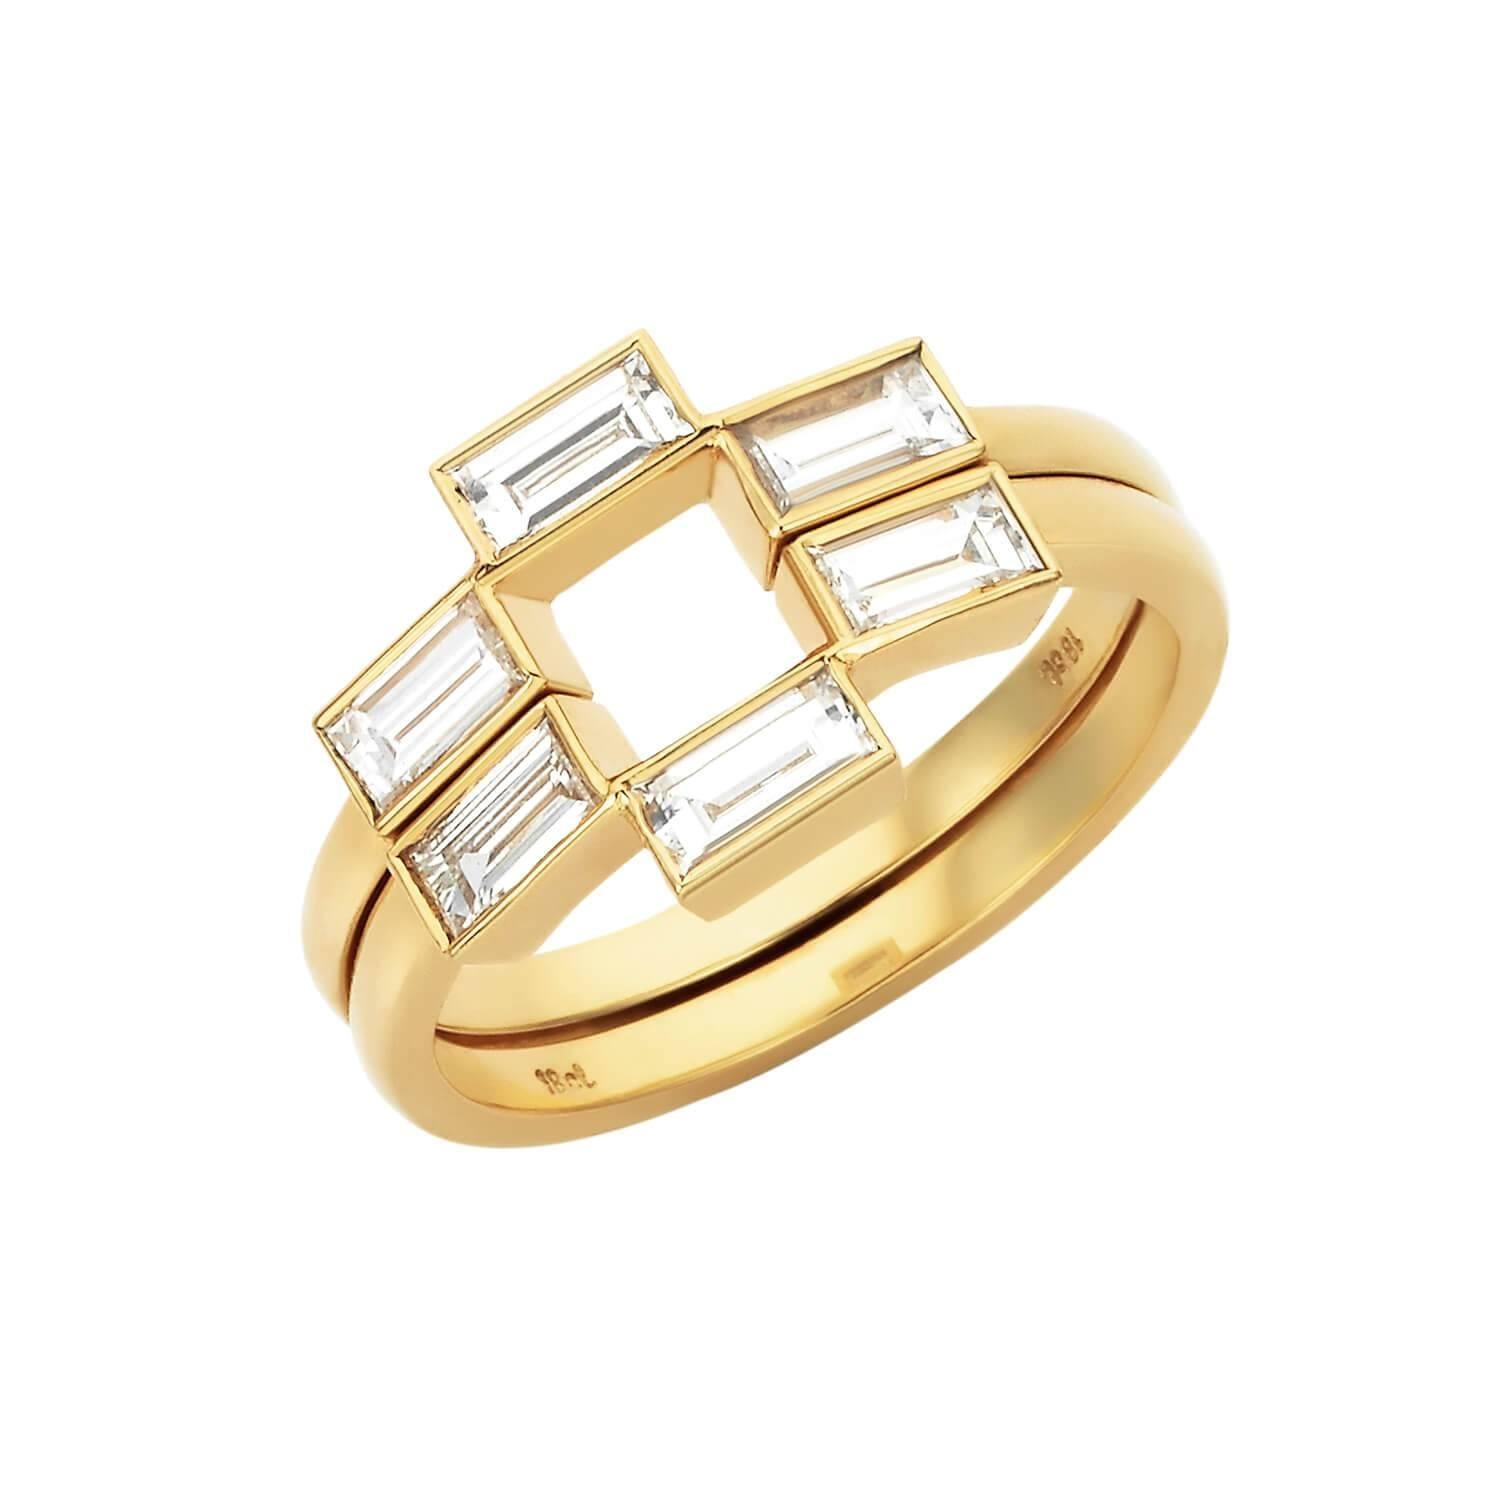 The Kester Wedding Bands honour the timeless and classical beauty of the baguette cut.

The stepped design of the diamonds align perfectly around the Callida Engagement ring to enhance the solitaire diamond.

2 x 18k Yellow Gold wedding bands, with